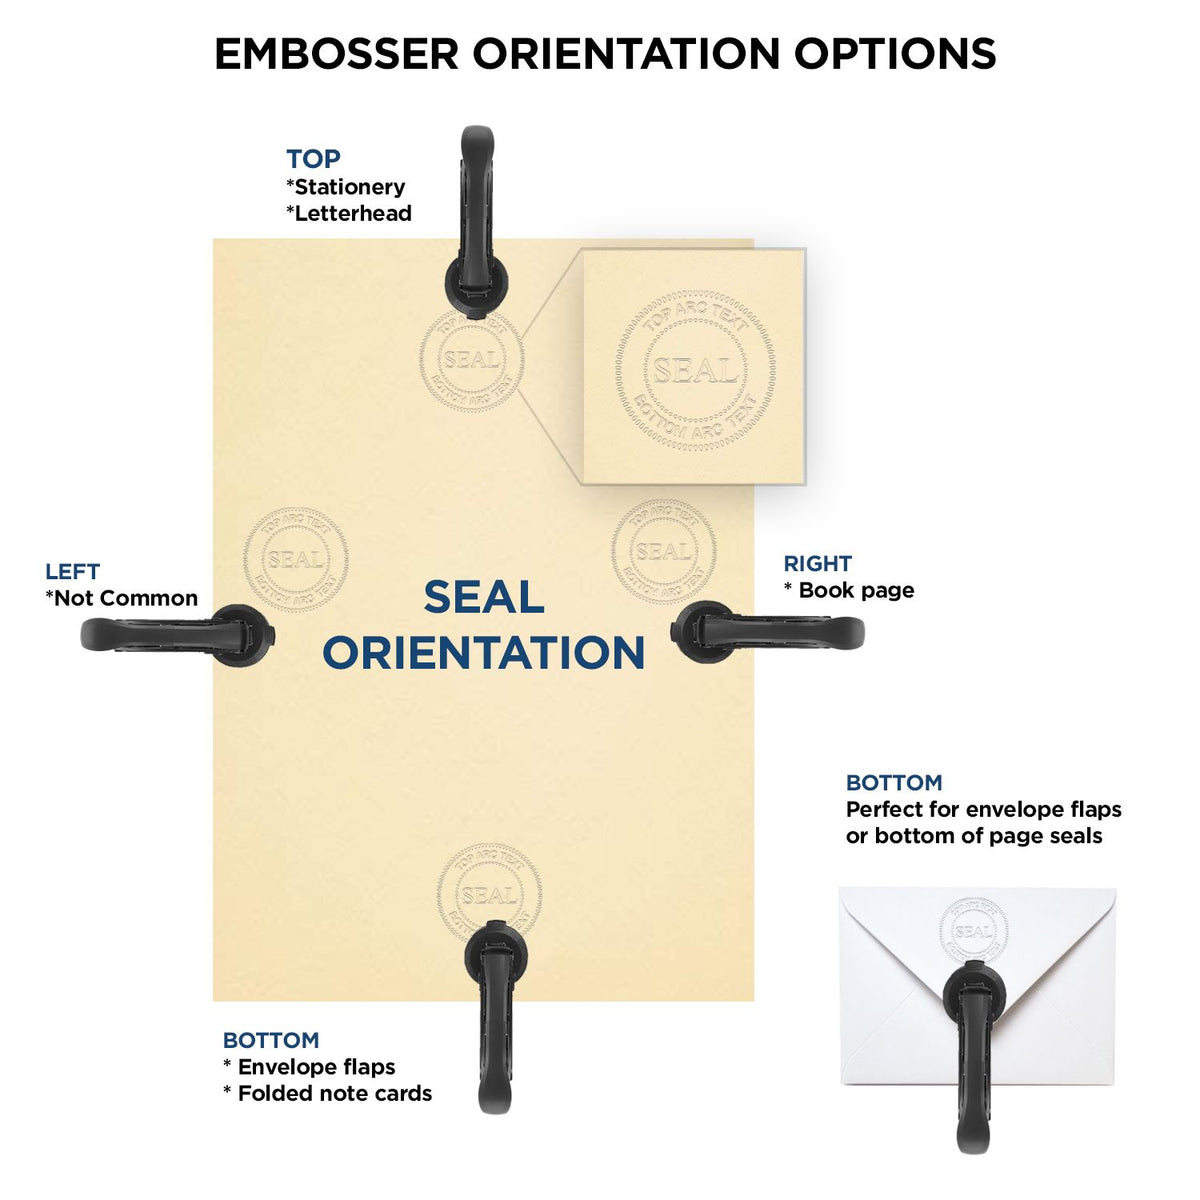 An infographic for the Gift Wyoming Engineer Seal showing embosser orientation, this is showing examples of a top, bottom, right and left insert.